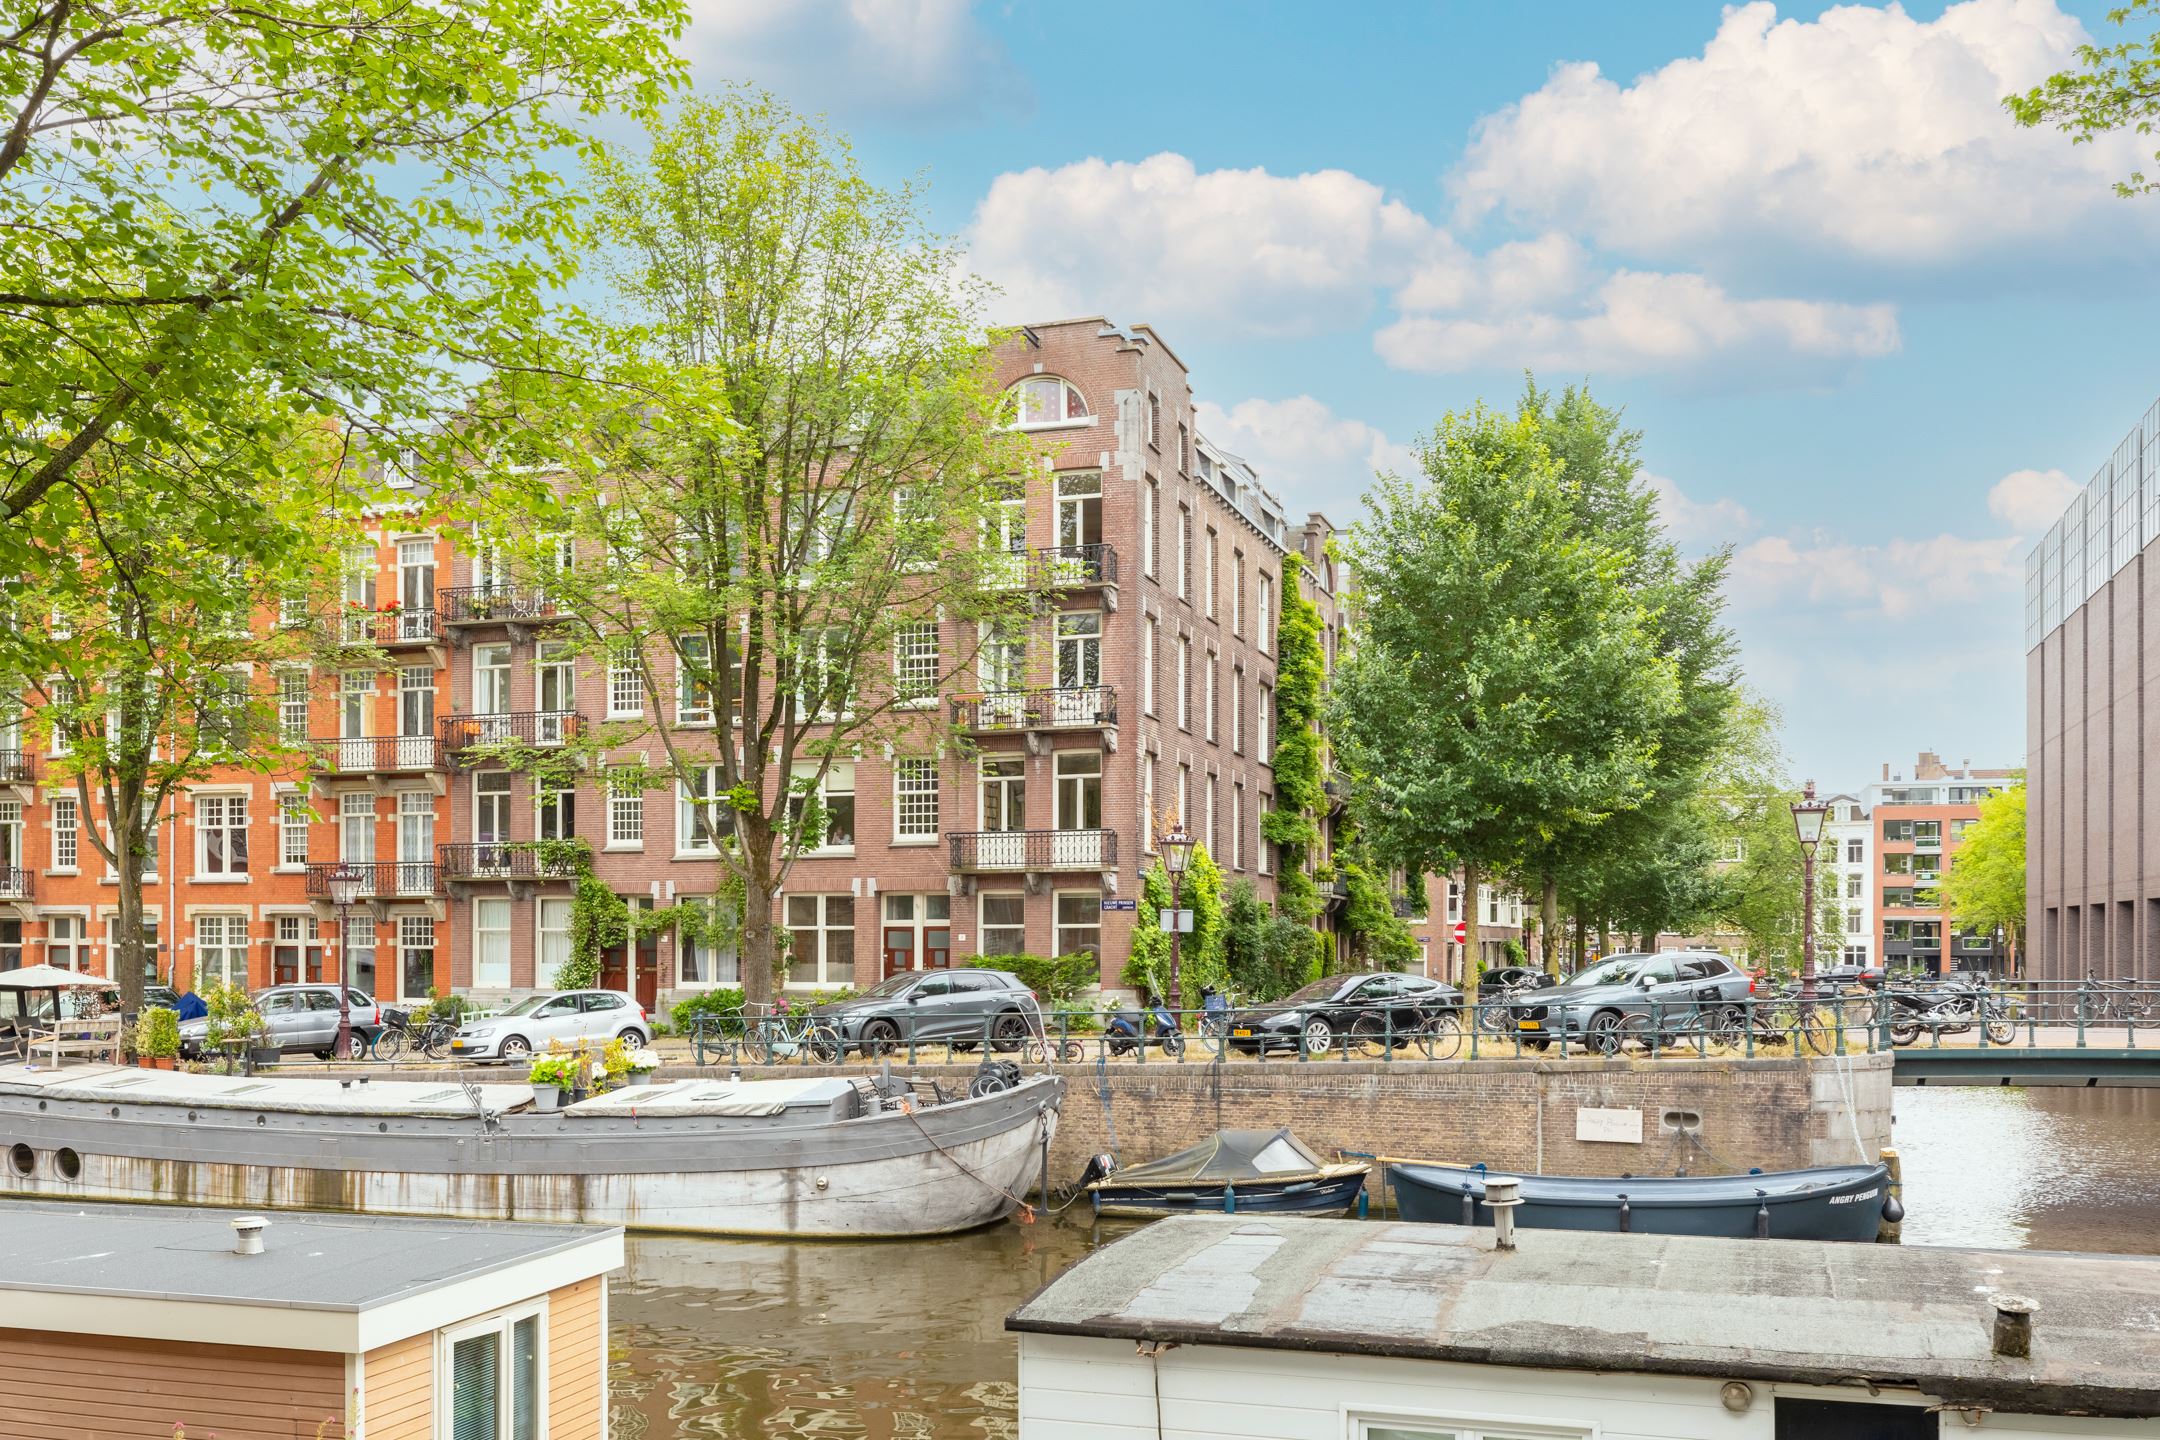 Featured image for “Nieuwe Prinsengracht 8”